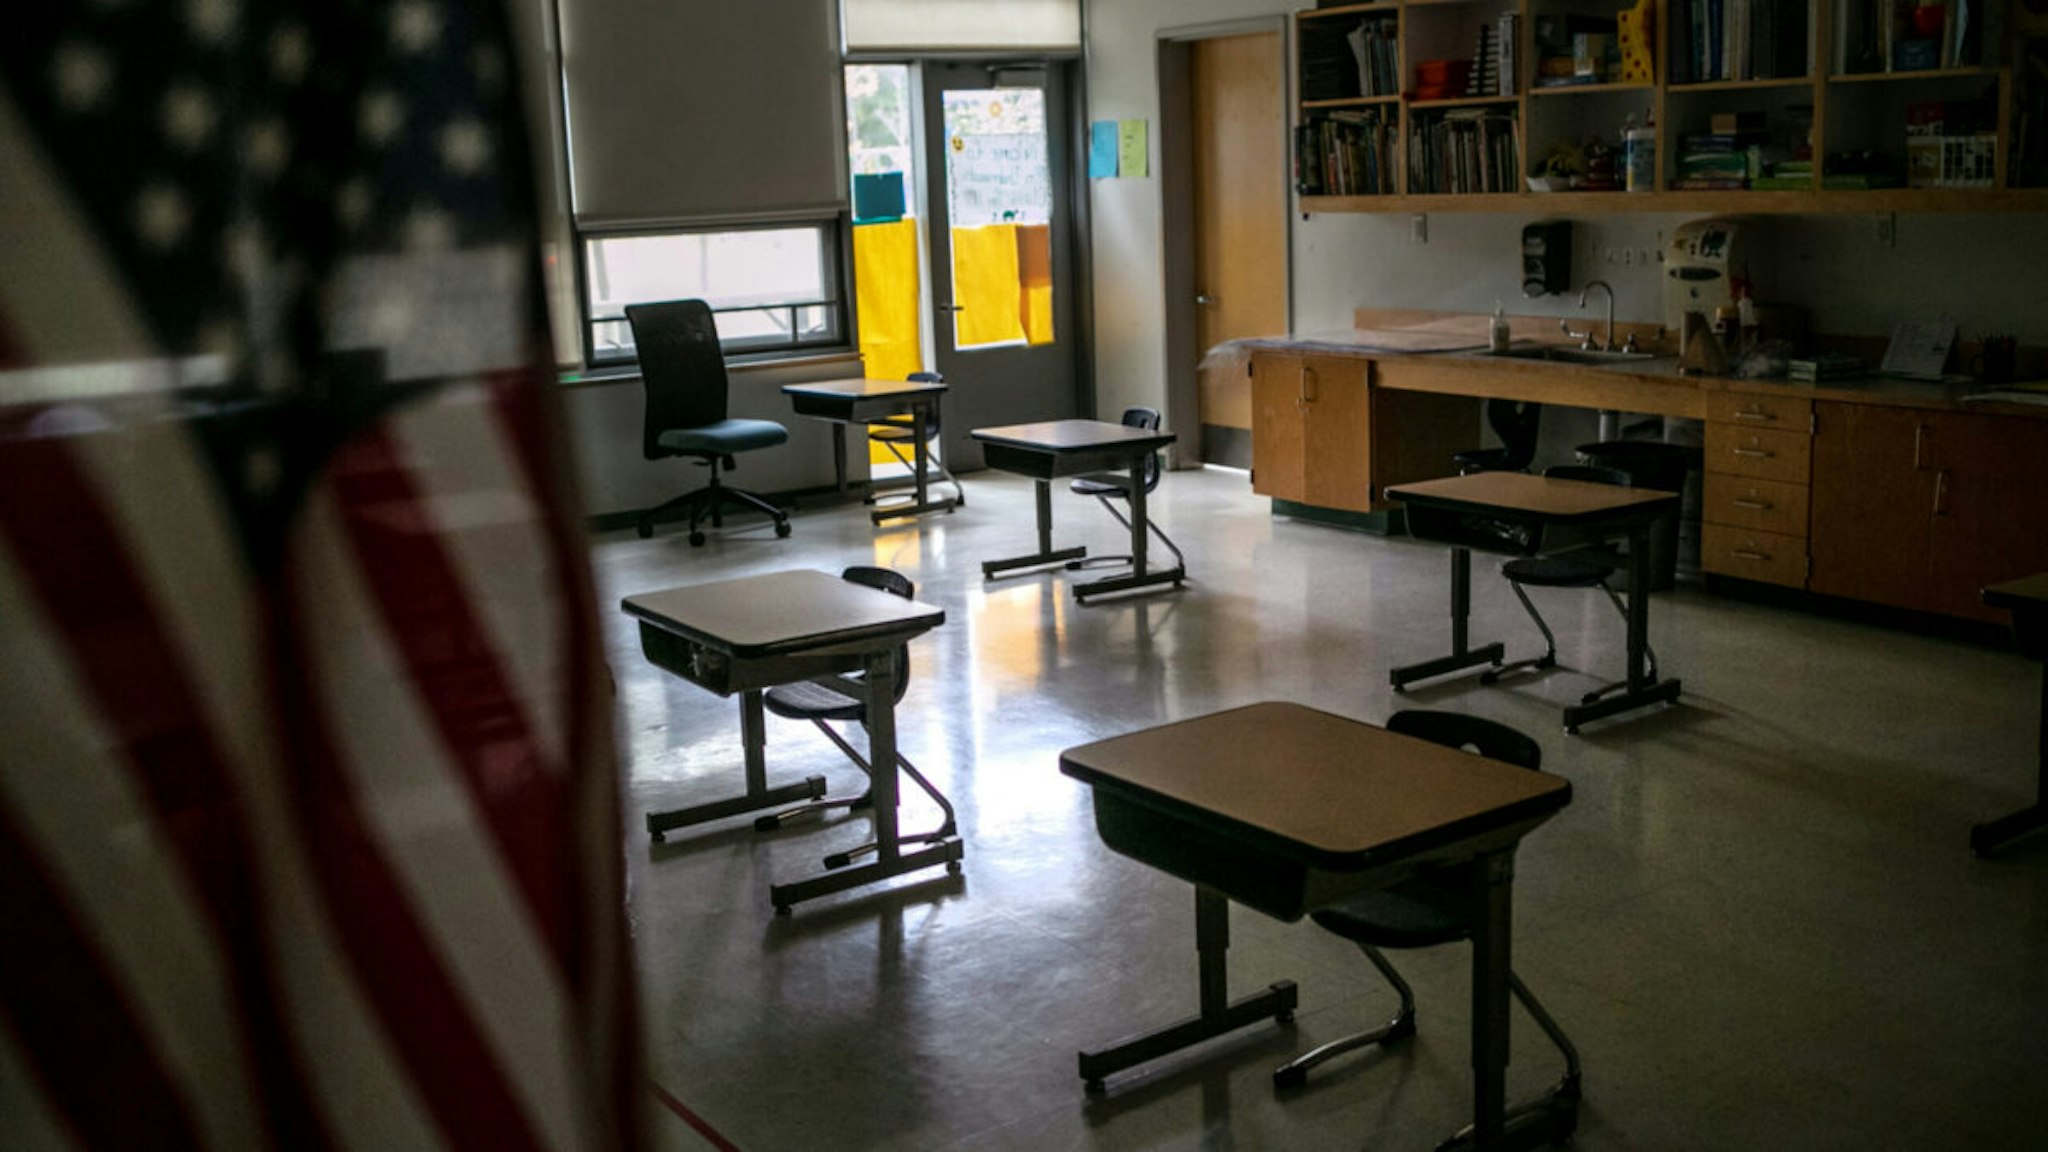 A kindergarten room sits empty at Rogers International School as students from that class quarantine at home, according to parents, on October 21, 2020 in Stamford, Connecticut.